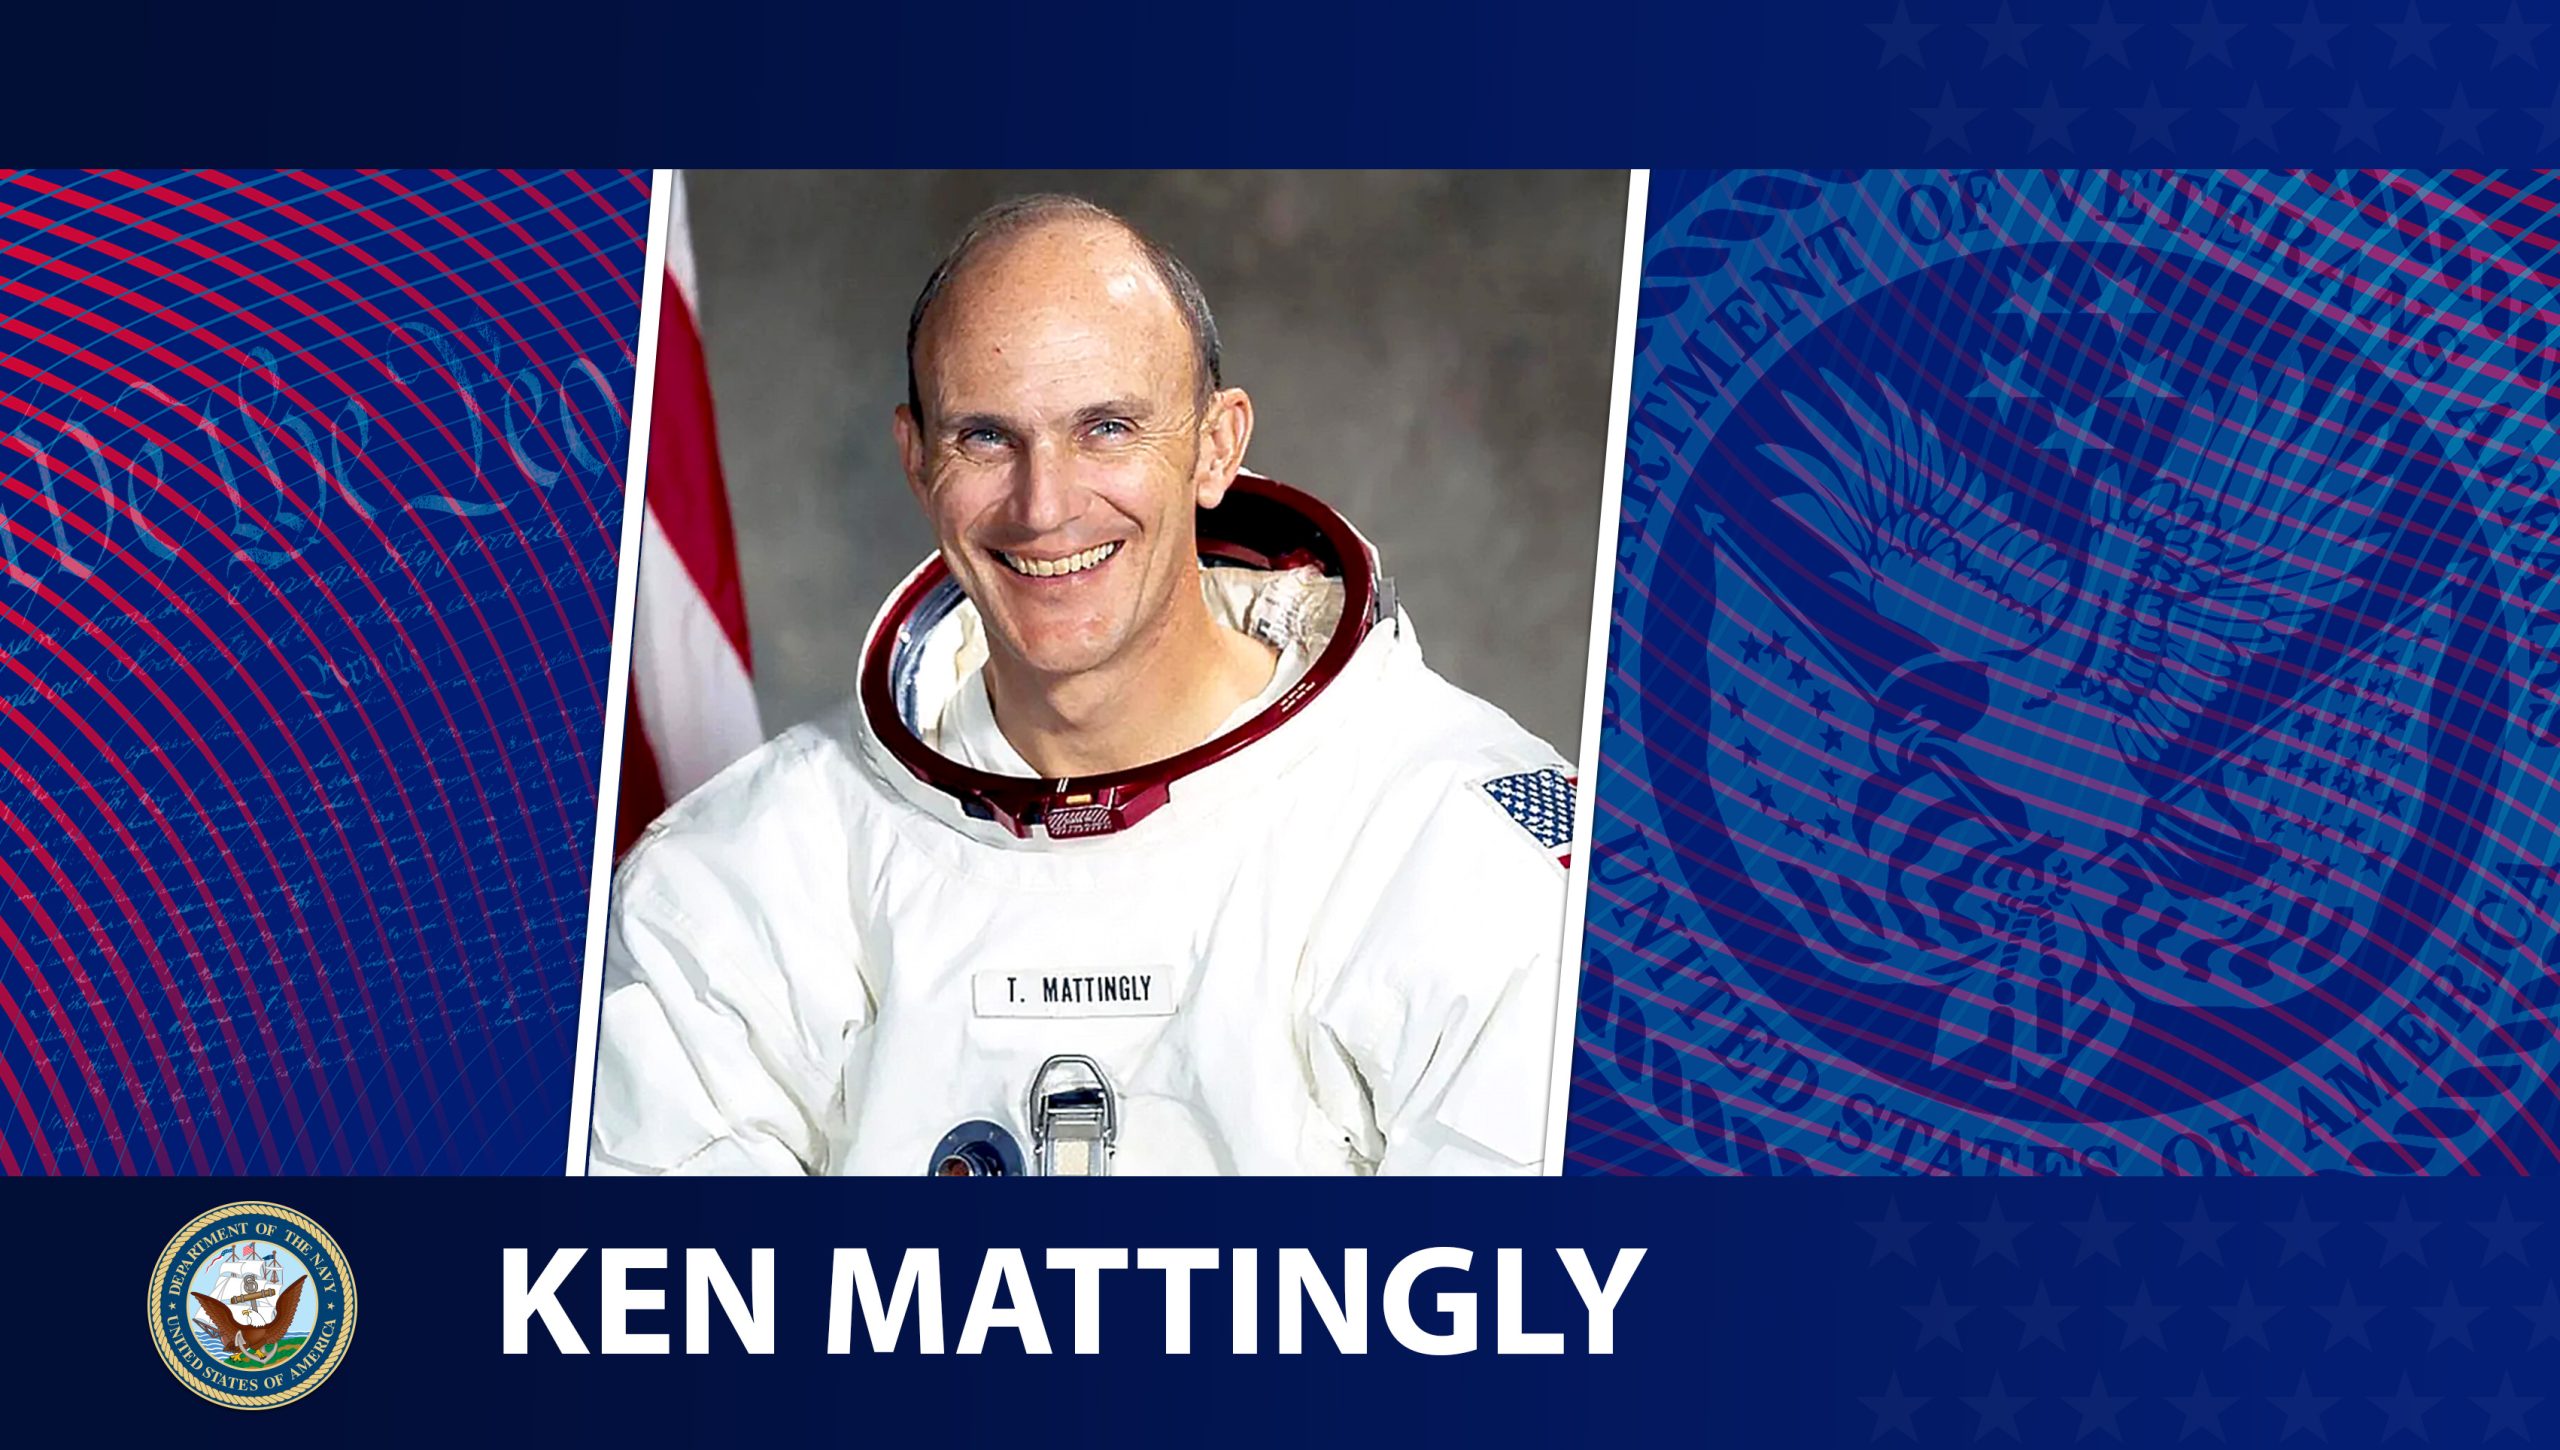 This week’s Honoring Veterans Spotlight honors the service of Navy Veteran Ken Mattingly, who served as a pilot during the 1950s and later became an astronaut during the Apollo missions.